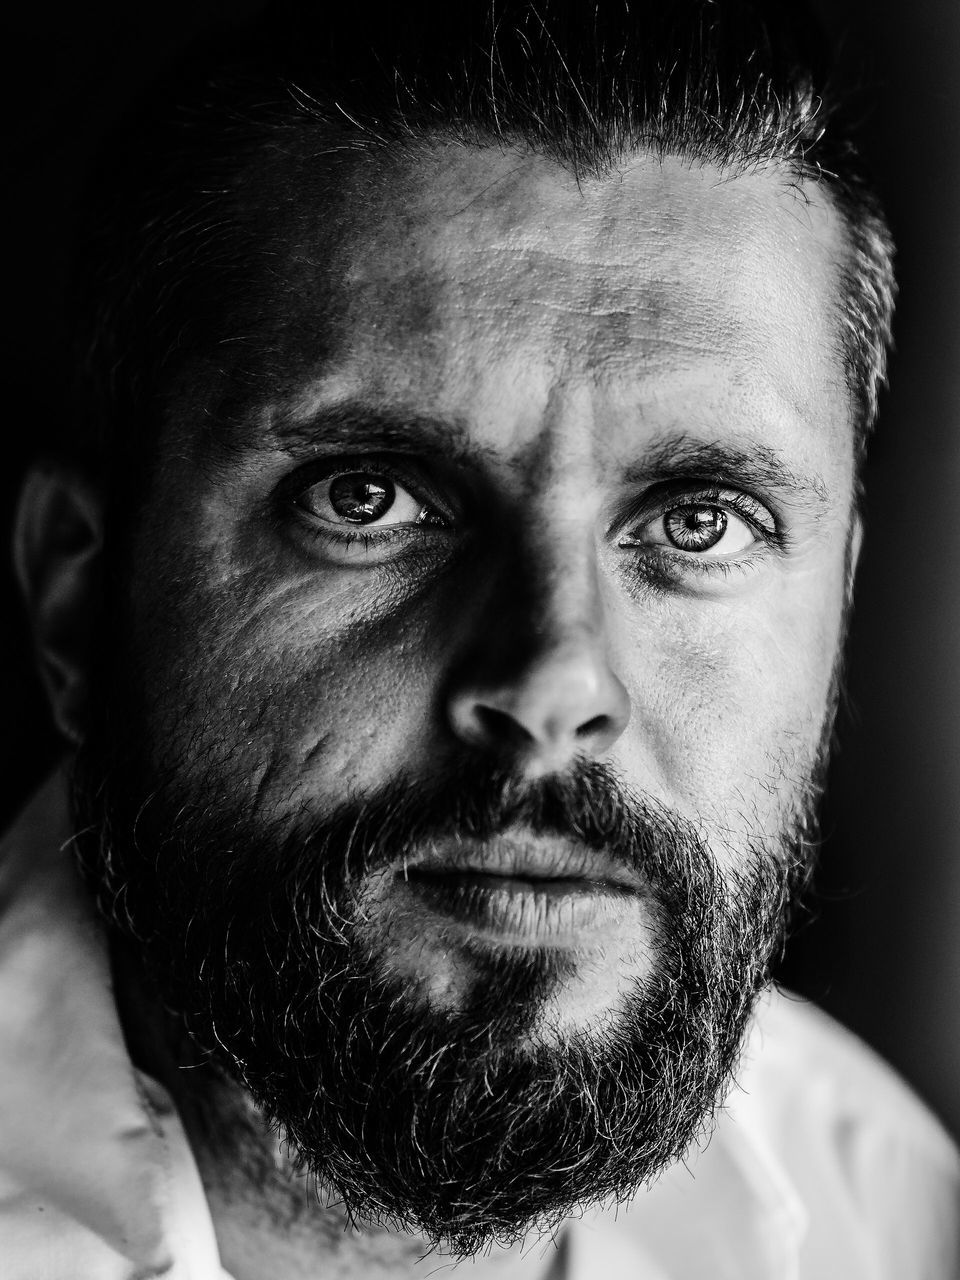 headshot, young adult, beard, young men, close-up, looking at camera, leisure activity, portrait, lifestyles, serious, person, human face, focus on foreground, one mid adult man only, human hair, mature adult, studio shot